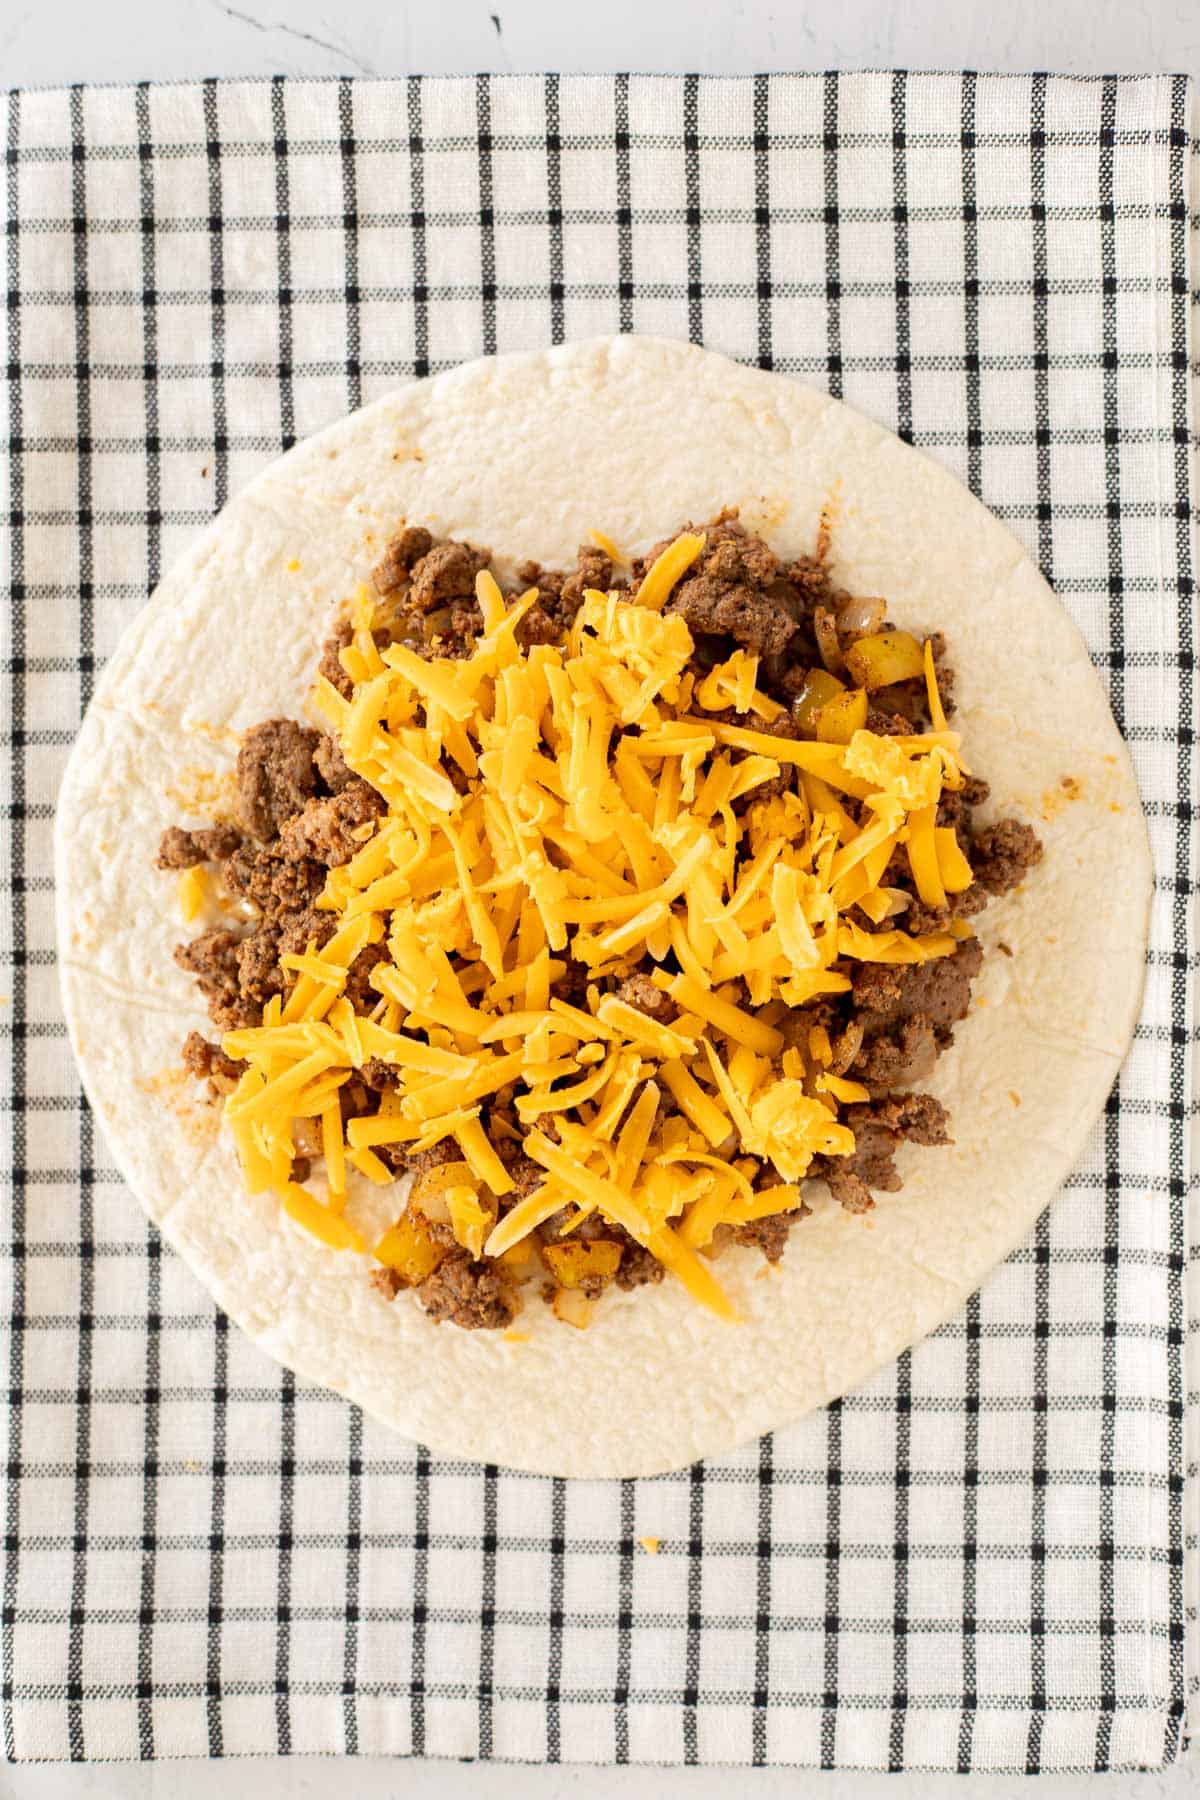 tortilla topped with cooked ground beef and shredded cheese on a checkered tea towel.